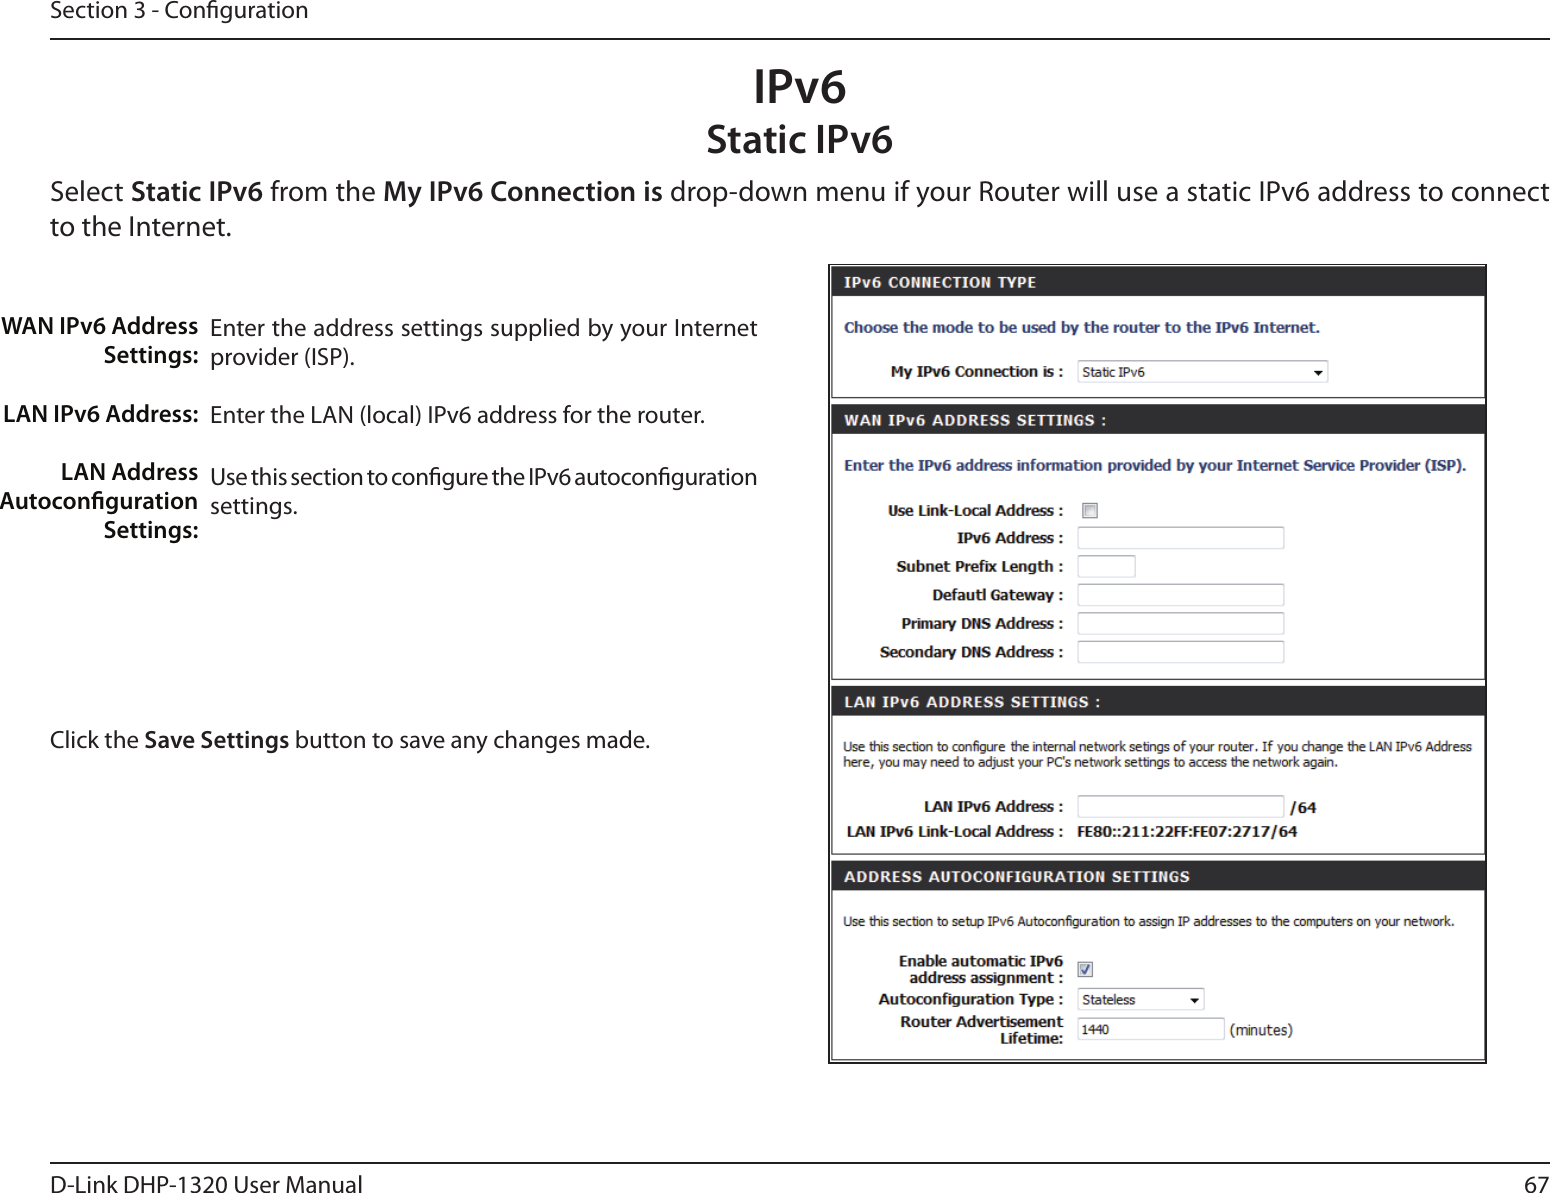 67D-Link DHP-1320 User ManualSection 3 - CongurationIPv6Static IPv6Select Static IPv6 from the My IPv6 Connection is drop-down menu if your Router will use a static IPv6 address to connect to the Internet.Enter the address settings supplied by your Internet provider (ISP). Enter the LAN (local) IPv6 address for the router. Use this section to congure the IPv6 autoconguration settings.WAN IPv6 Address Settings:LAN IPv6 Address:LAN Address Autoconguration Settings:Click the Save Settings button to save any changes made.